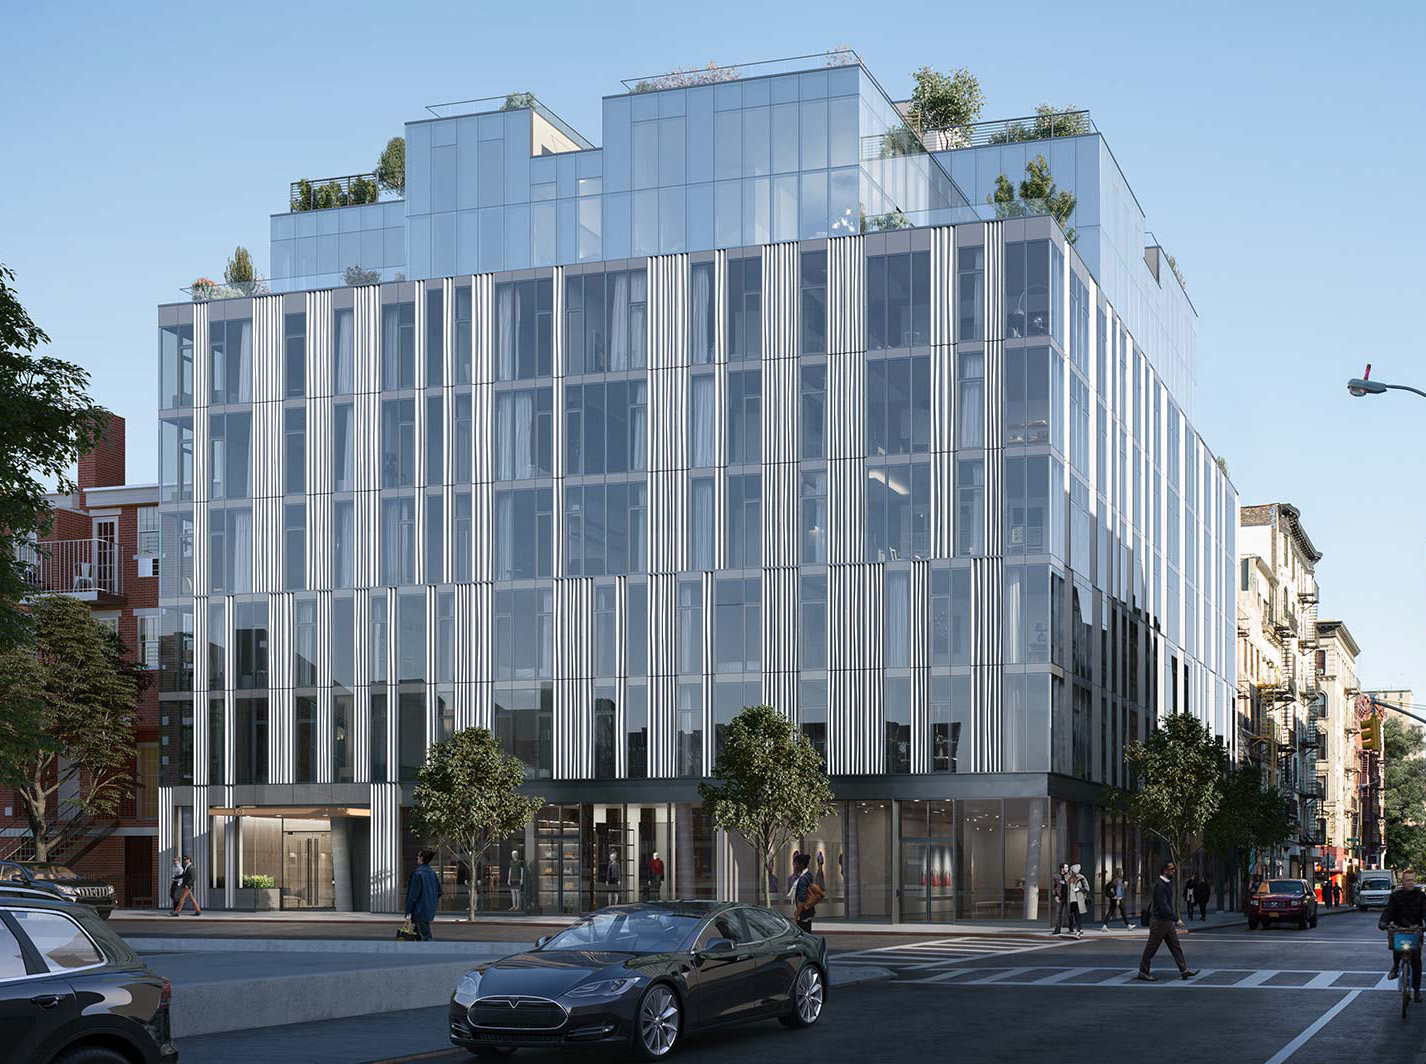 GEA Projects in the News: Construction is moving along quickly at 150 Rivington!